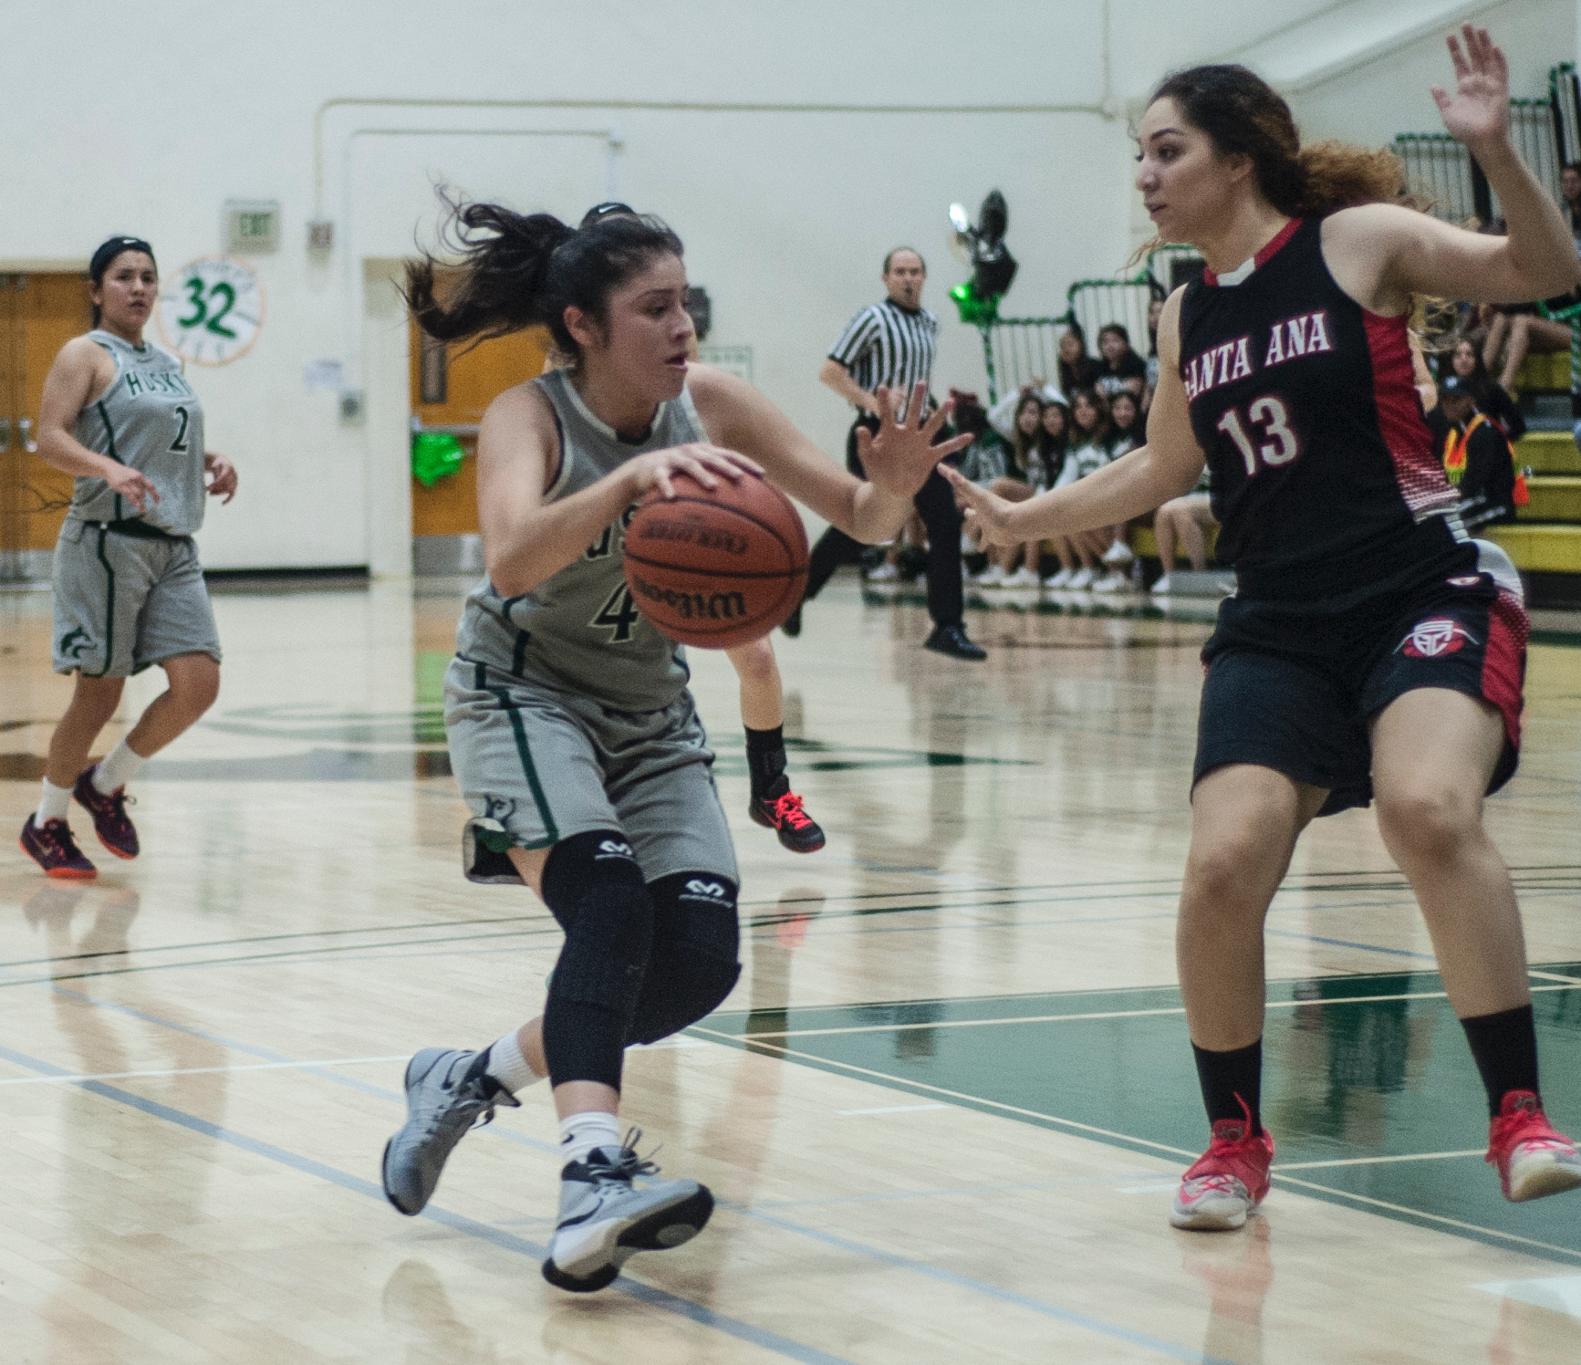 East Los Angeles College freshman guard Allissa Gomez drives towards the paint around Santa Ana College sophomore guard Mercedes Munoz in a 101-94 Huskies win in Round 2 of the playoffs on Feb. 26.  (Photo by Tadzio Garcia)